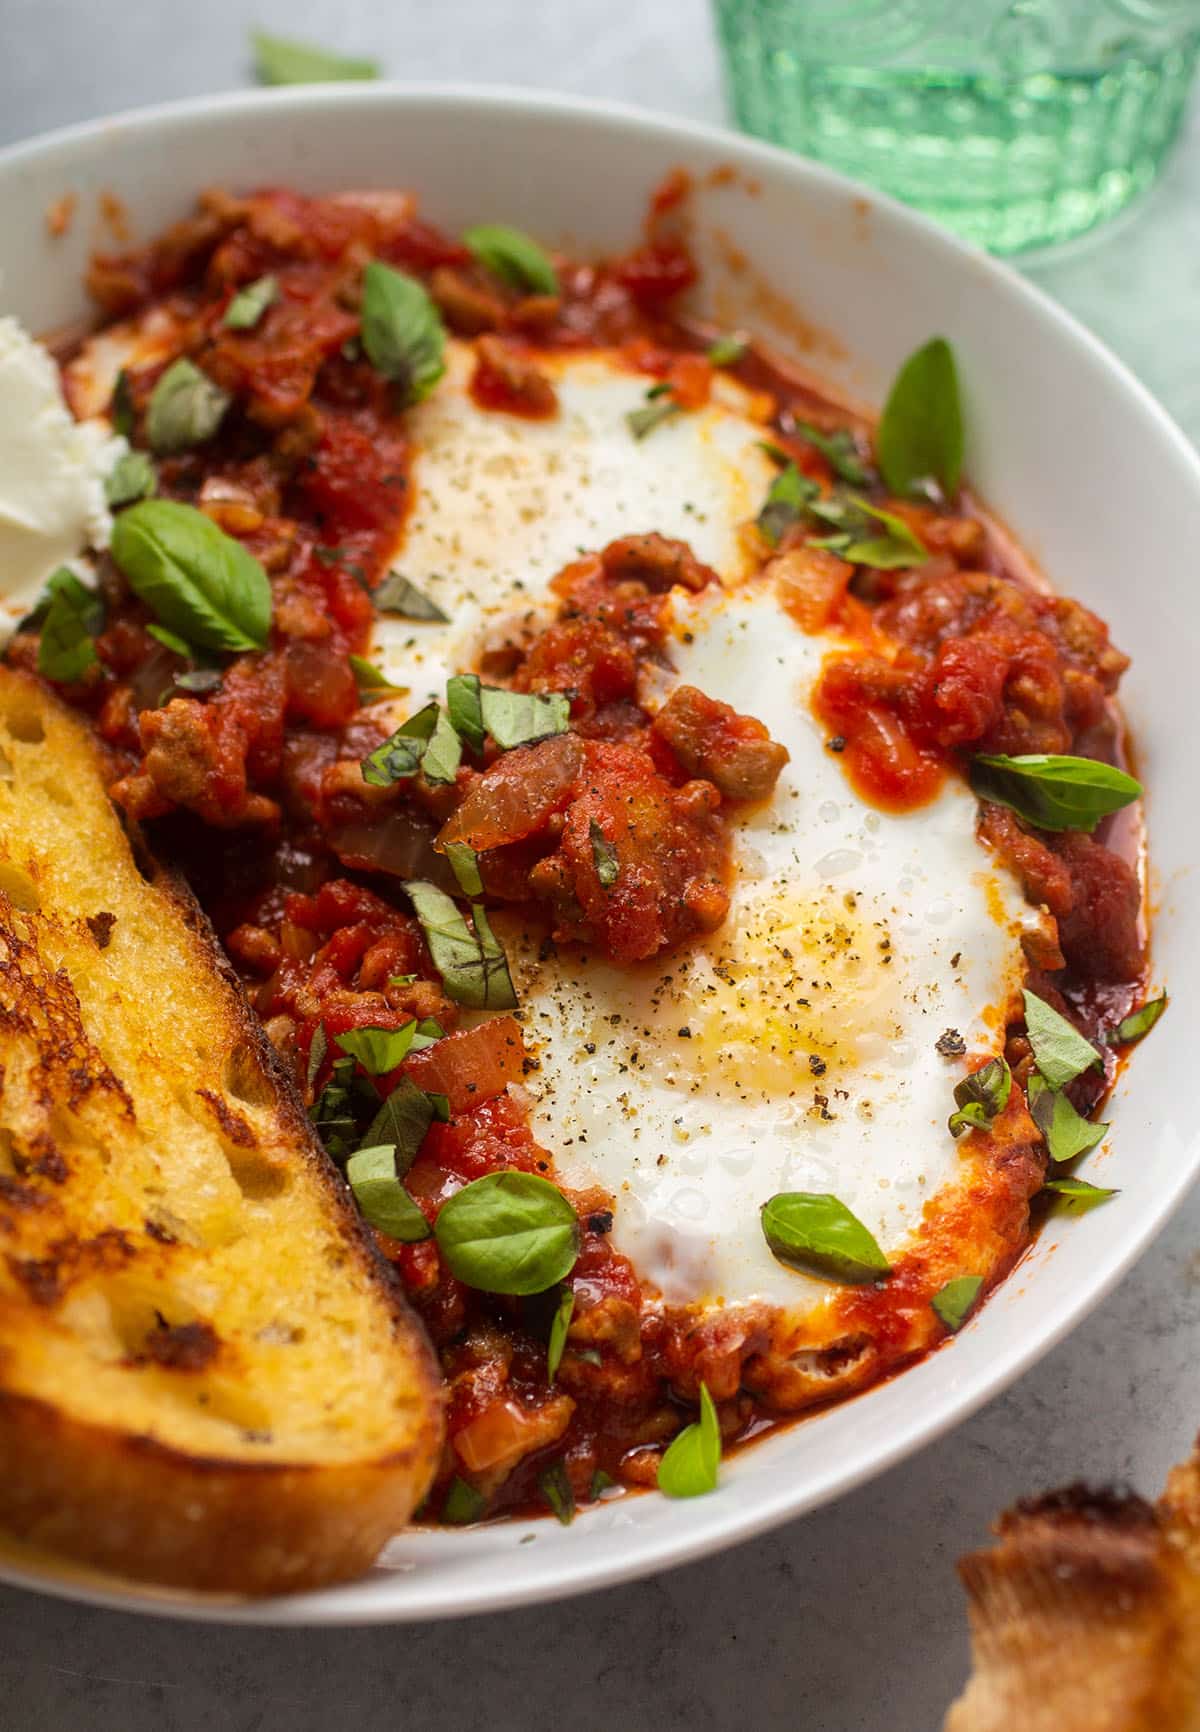 Two baked eggs with tomato sauce in a shallow white bowl.